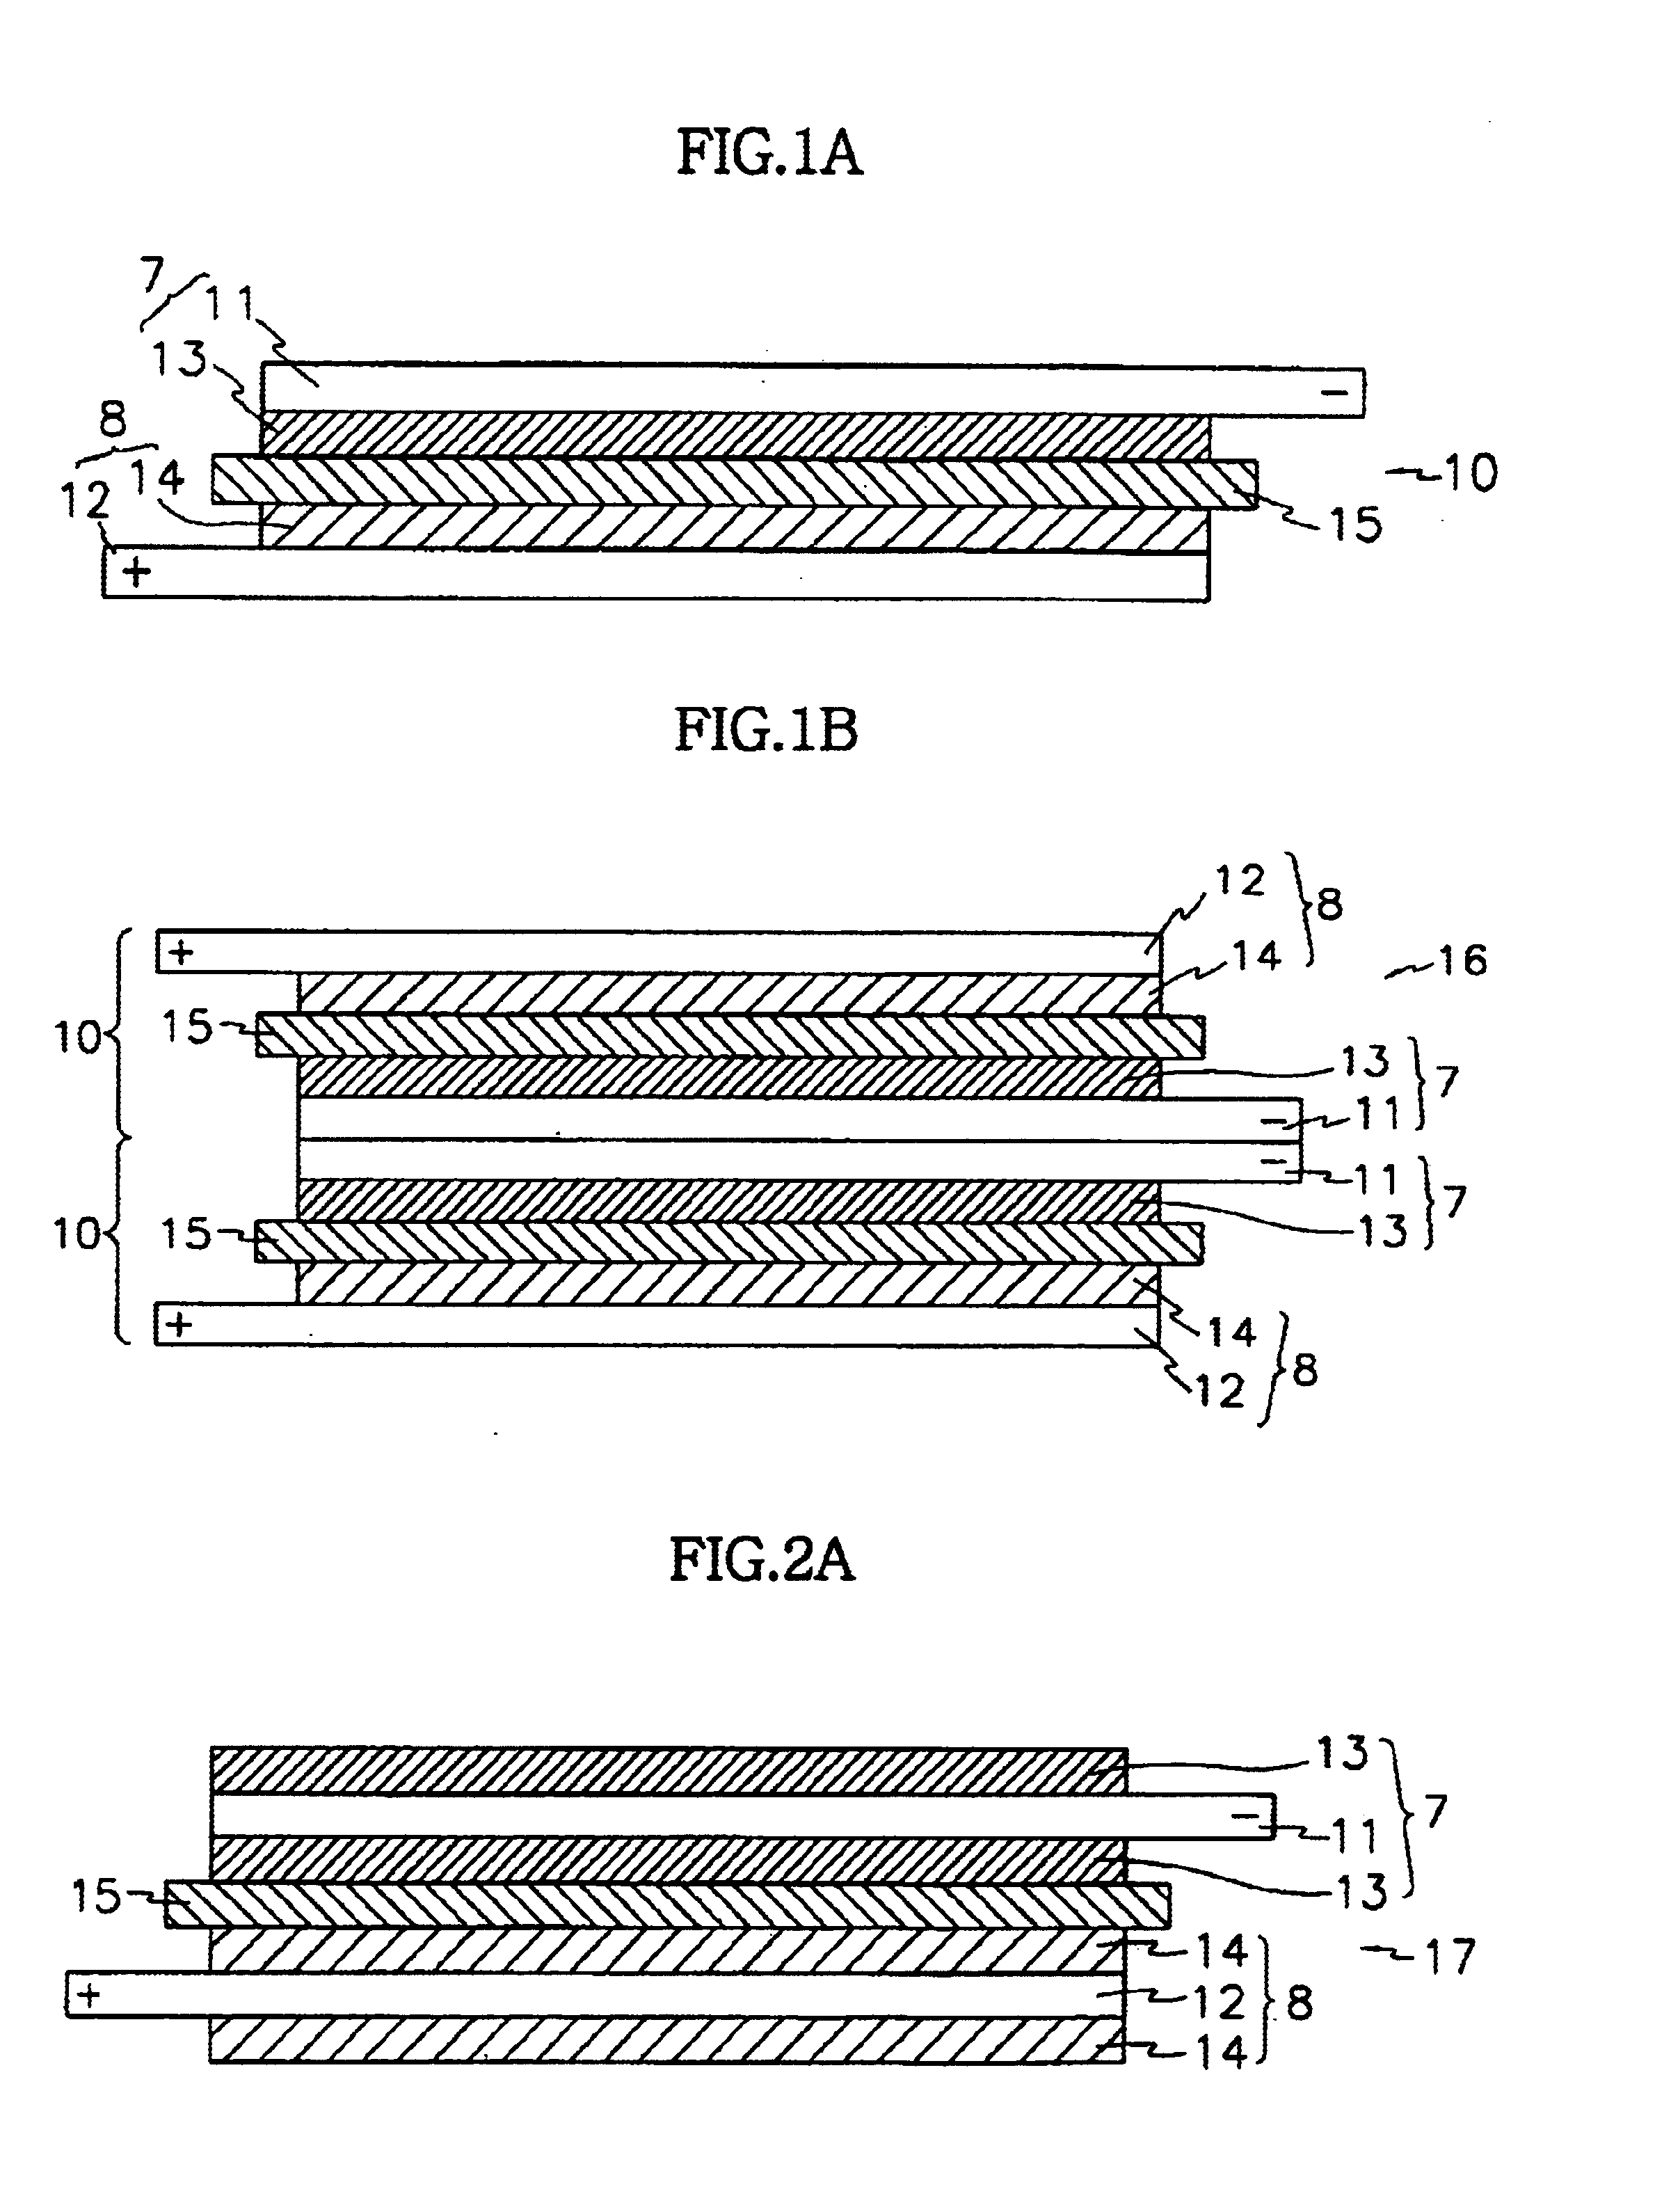 Stacked electrochemical cell